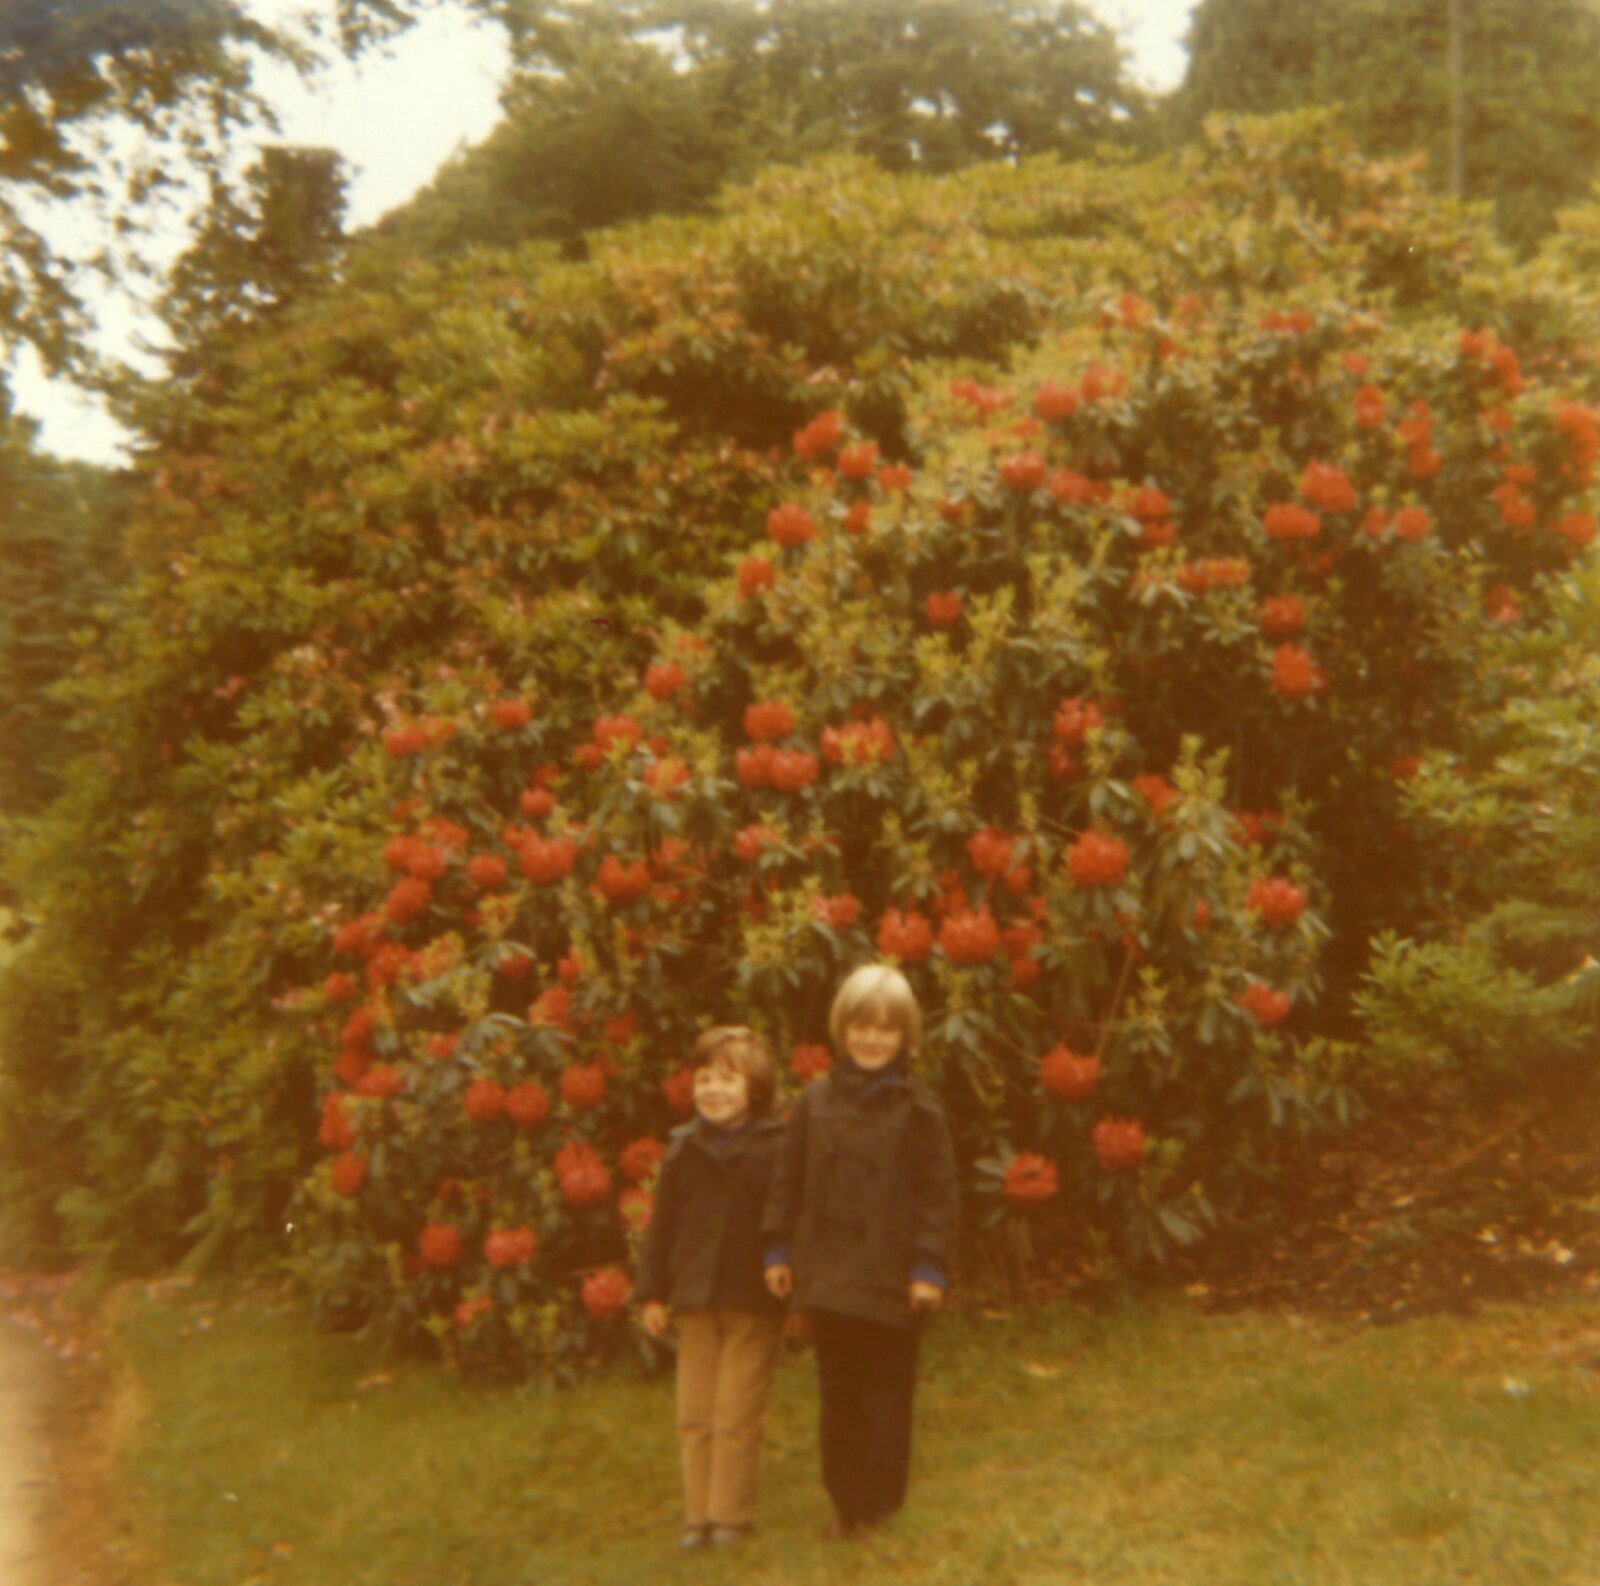 In front of some rhododendrons from Family History: The 1970s, Timperley and Sandbach, Cheshire - 24th January 2020